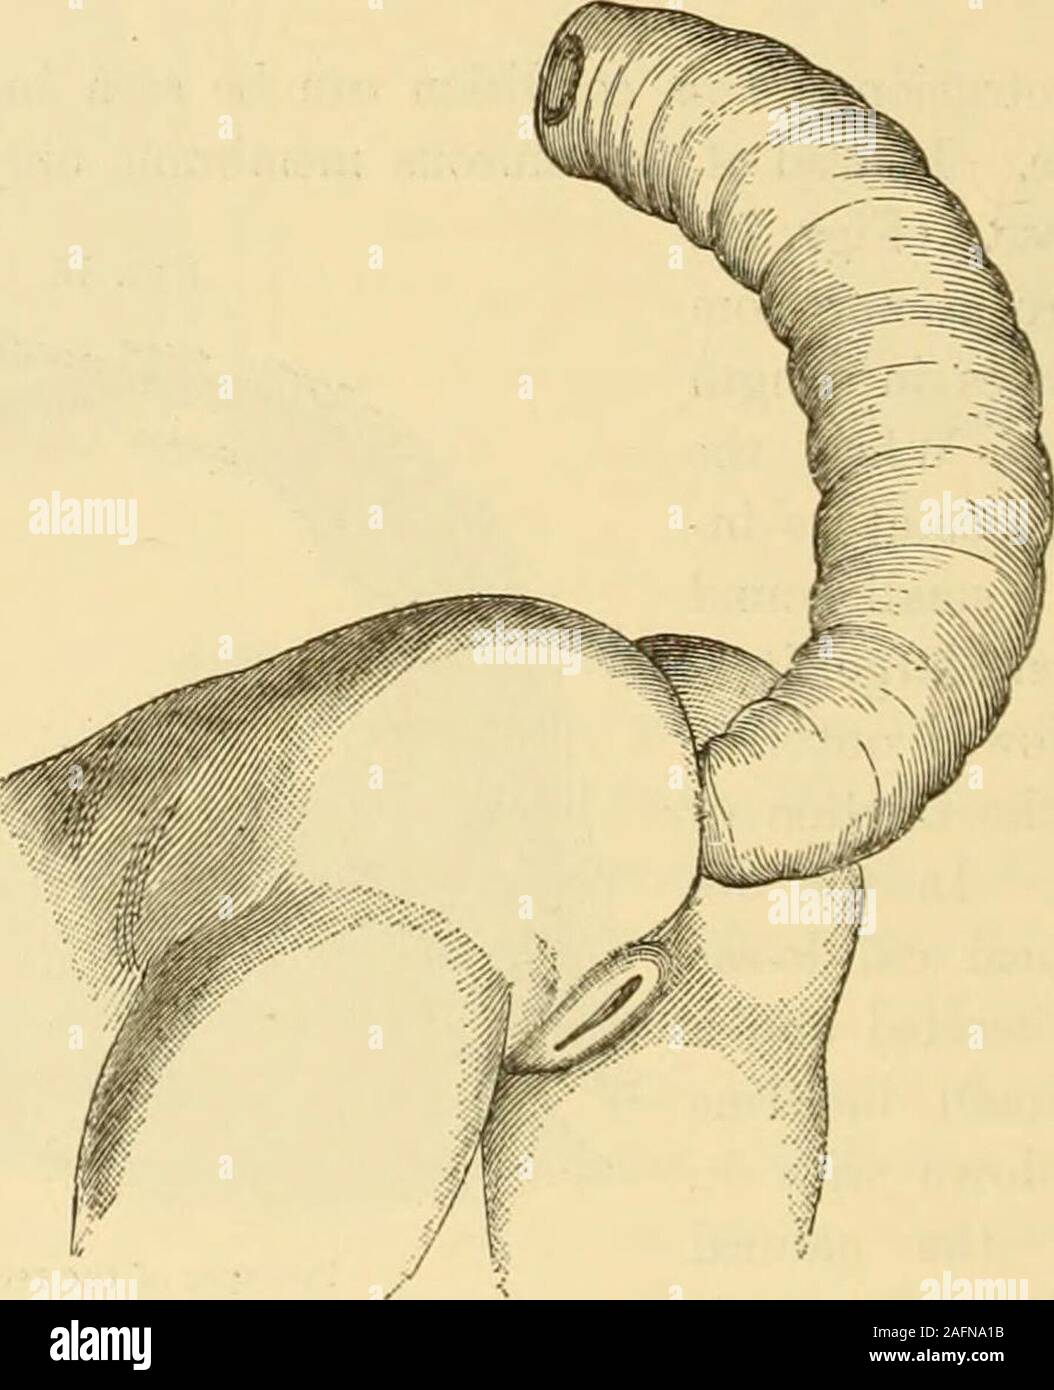 . Clinical gyncology, medical and surgical. Prolapse of the rectum. 902 DISEASES OF THE RECTUM AND ANUS. Subsequently it is covered with pus, or has a grayish hue, showing superficialulcerations. The membrane assumes the character of the skin, losing itsflexibility and sensibility, while its natural furrows gradually disappear.The tumor may attain the size of an orange. It is difficult to reduce it,on account of the hardening and thickening of the submucous tissue, whichprevent it from slipping back. In cases of this degree the sphinctersdilate, lose their tonicity, and no longer prevent the e Stock Photo